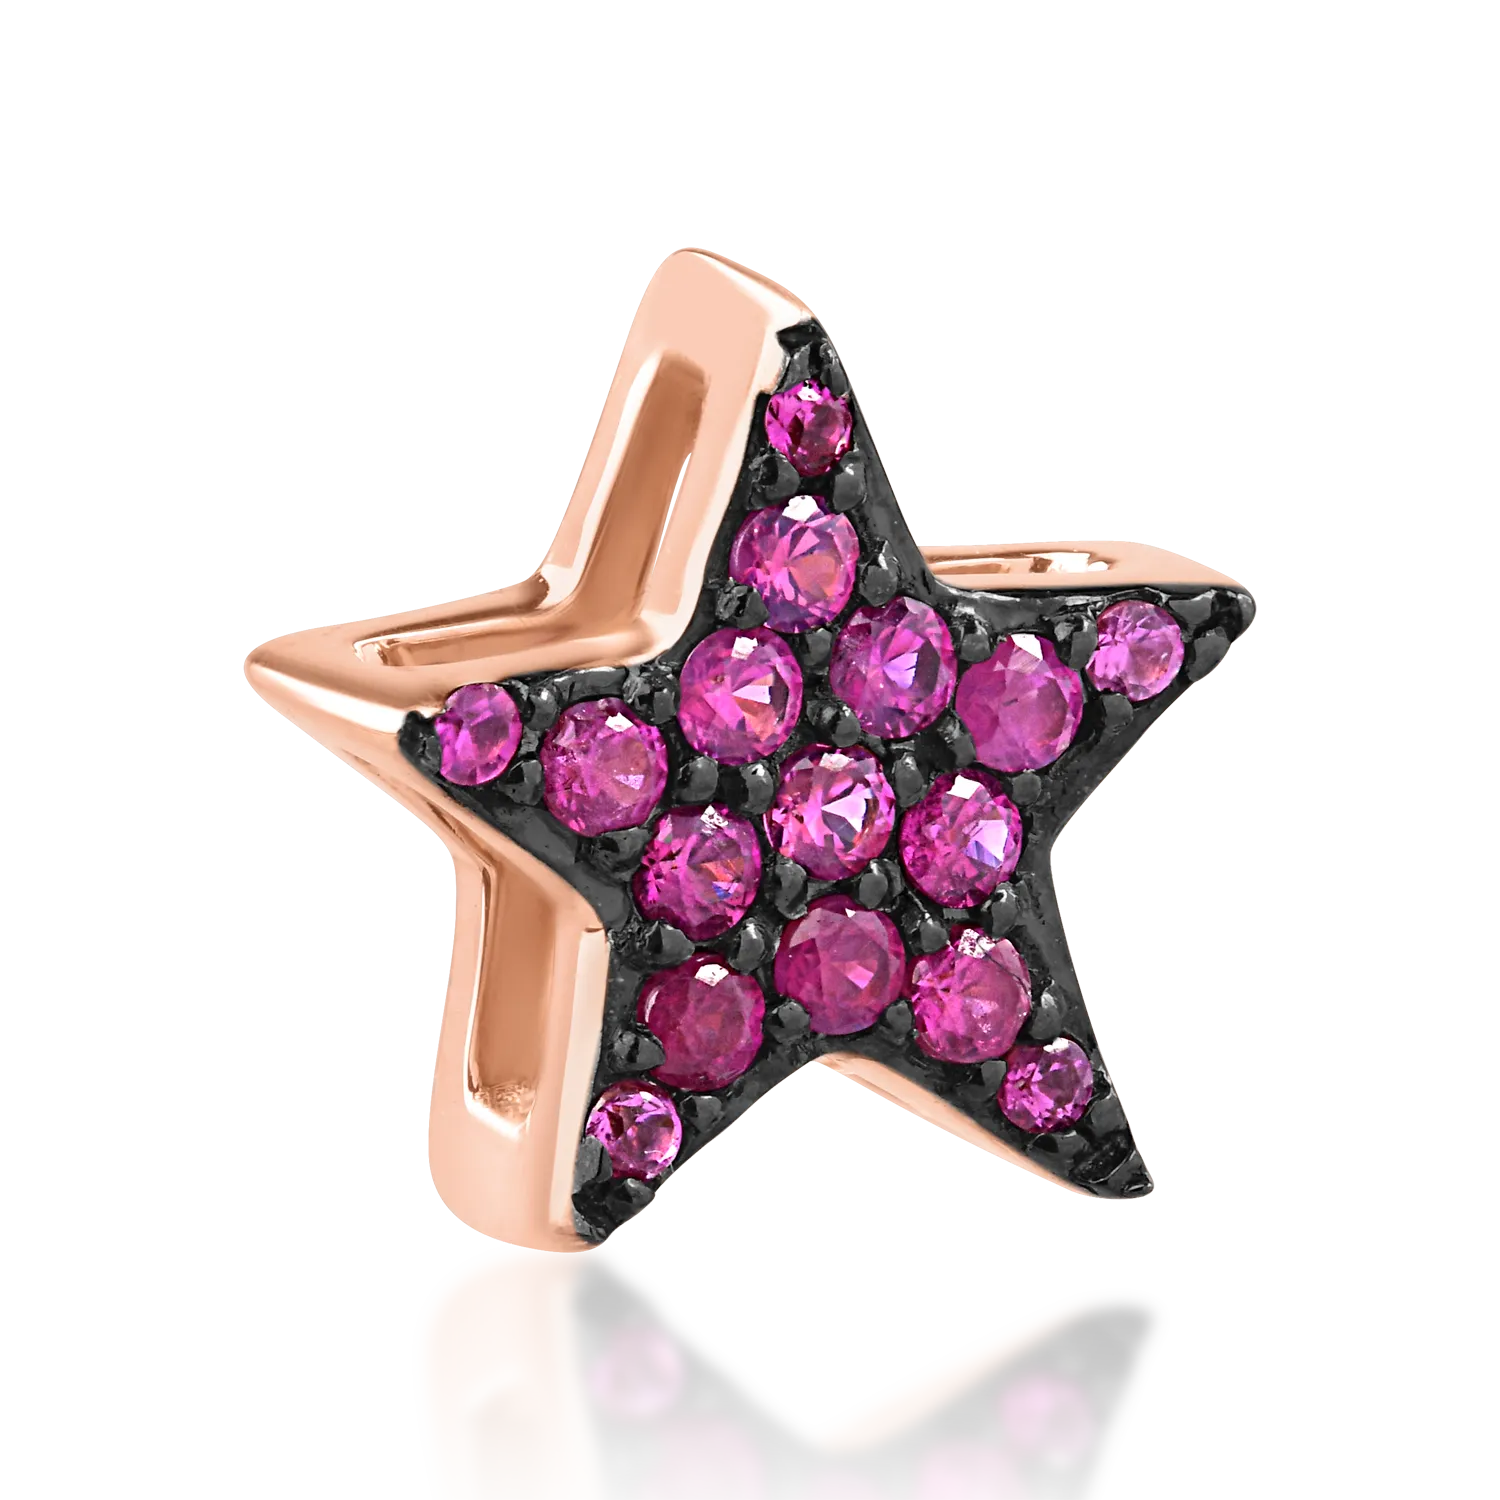 18K rose gold star pendant with 0.1ct rubies